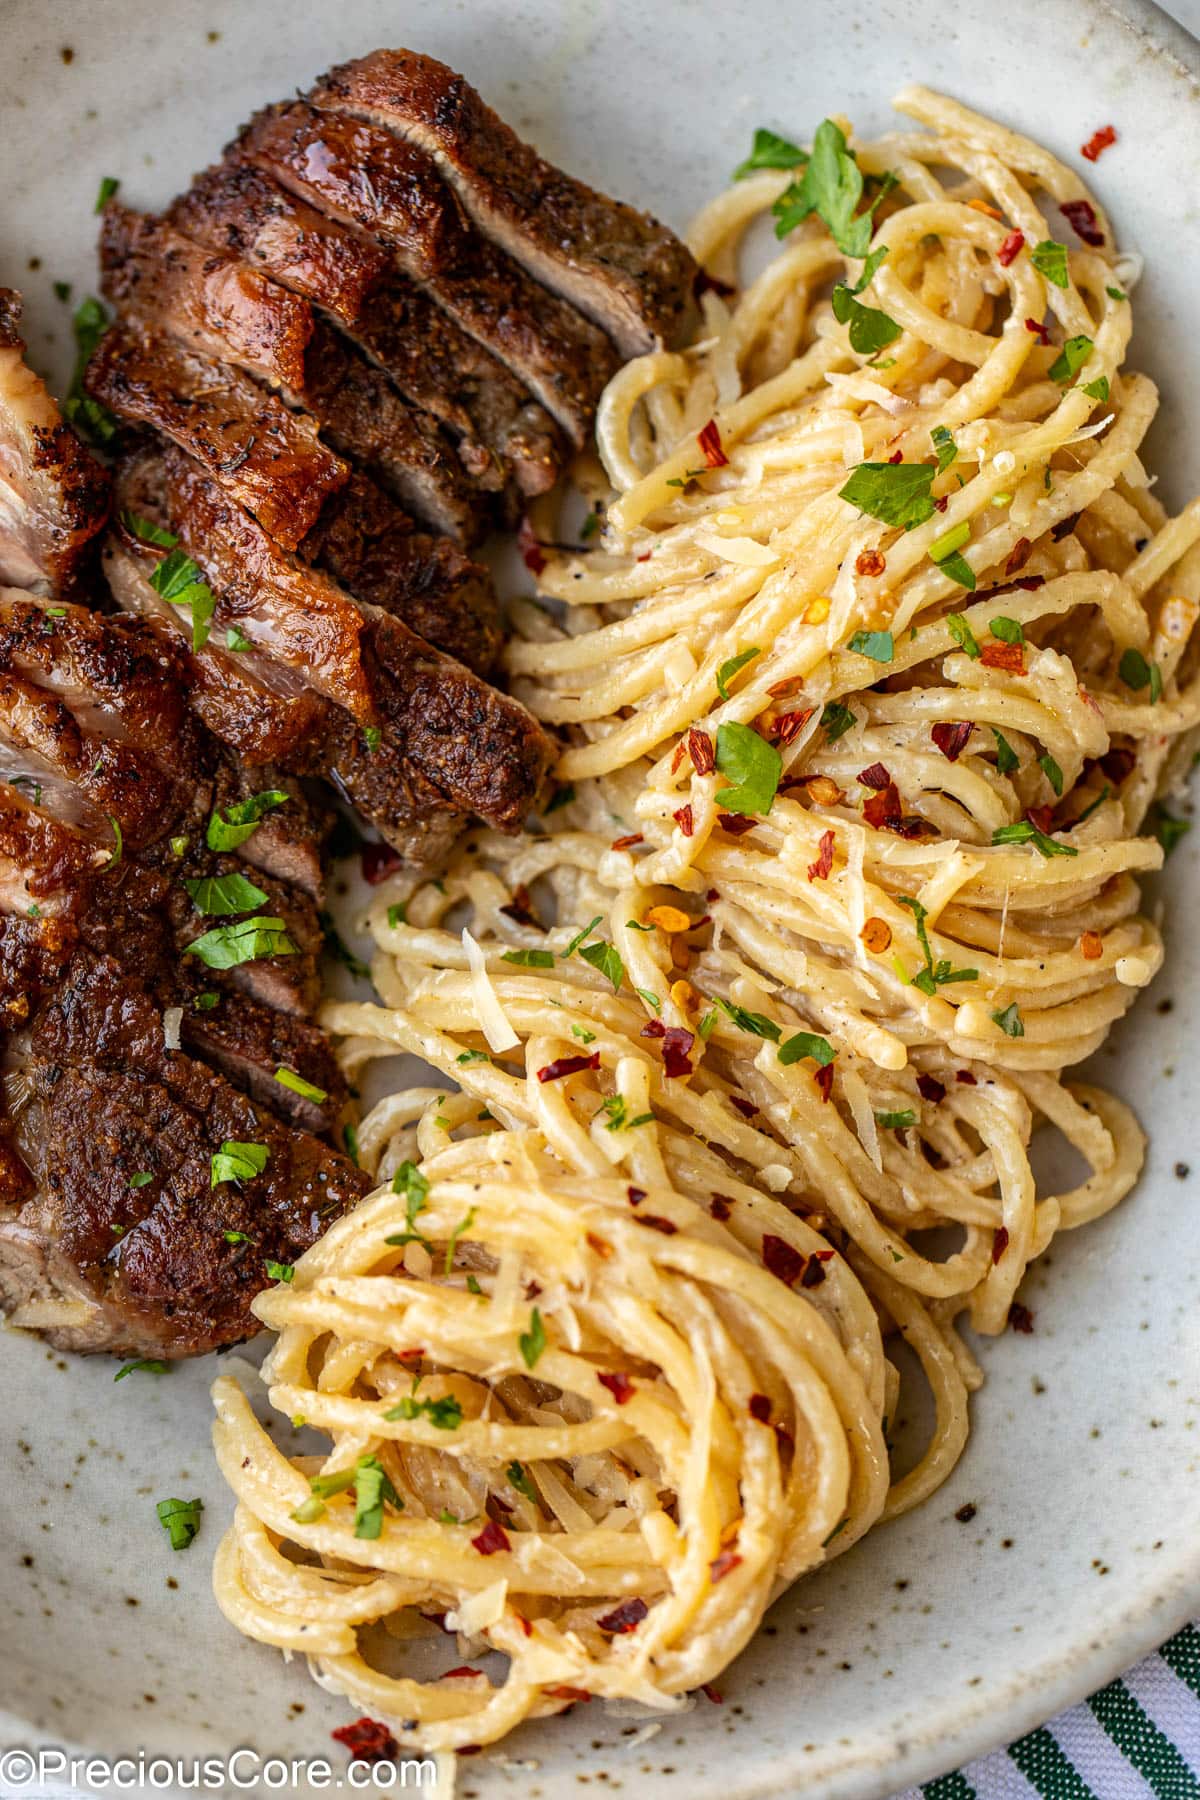 Sliced steak with cooked spaghetti in a bowl.